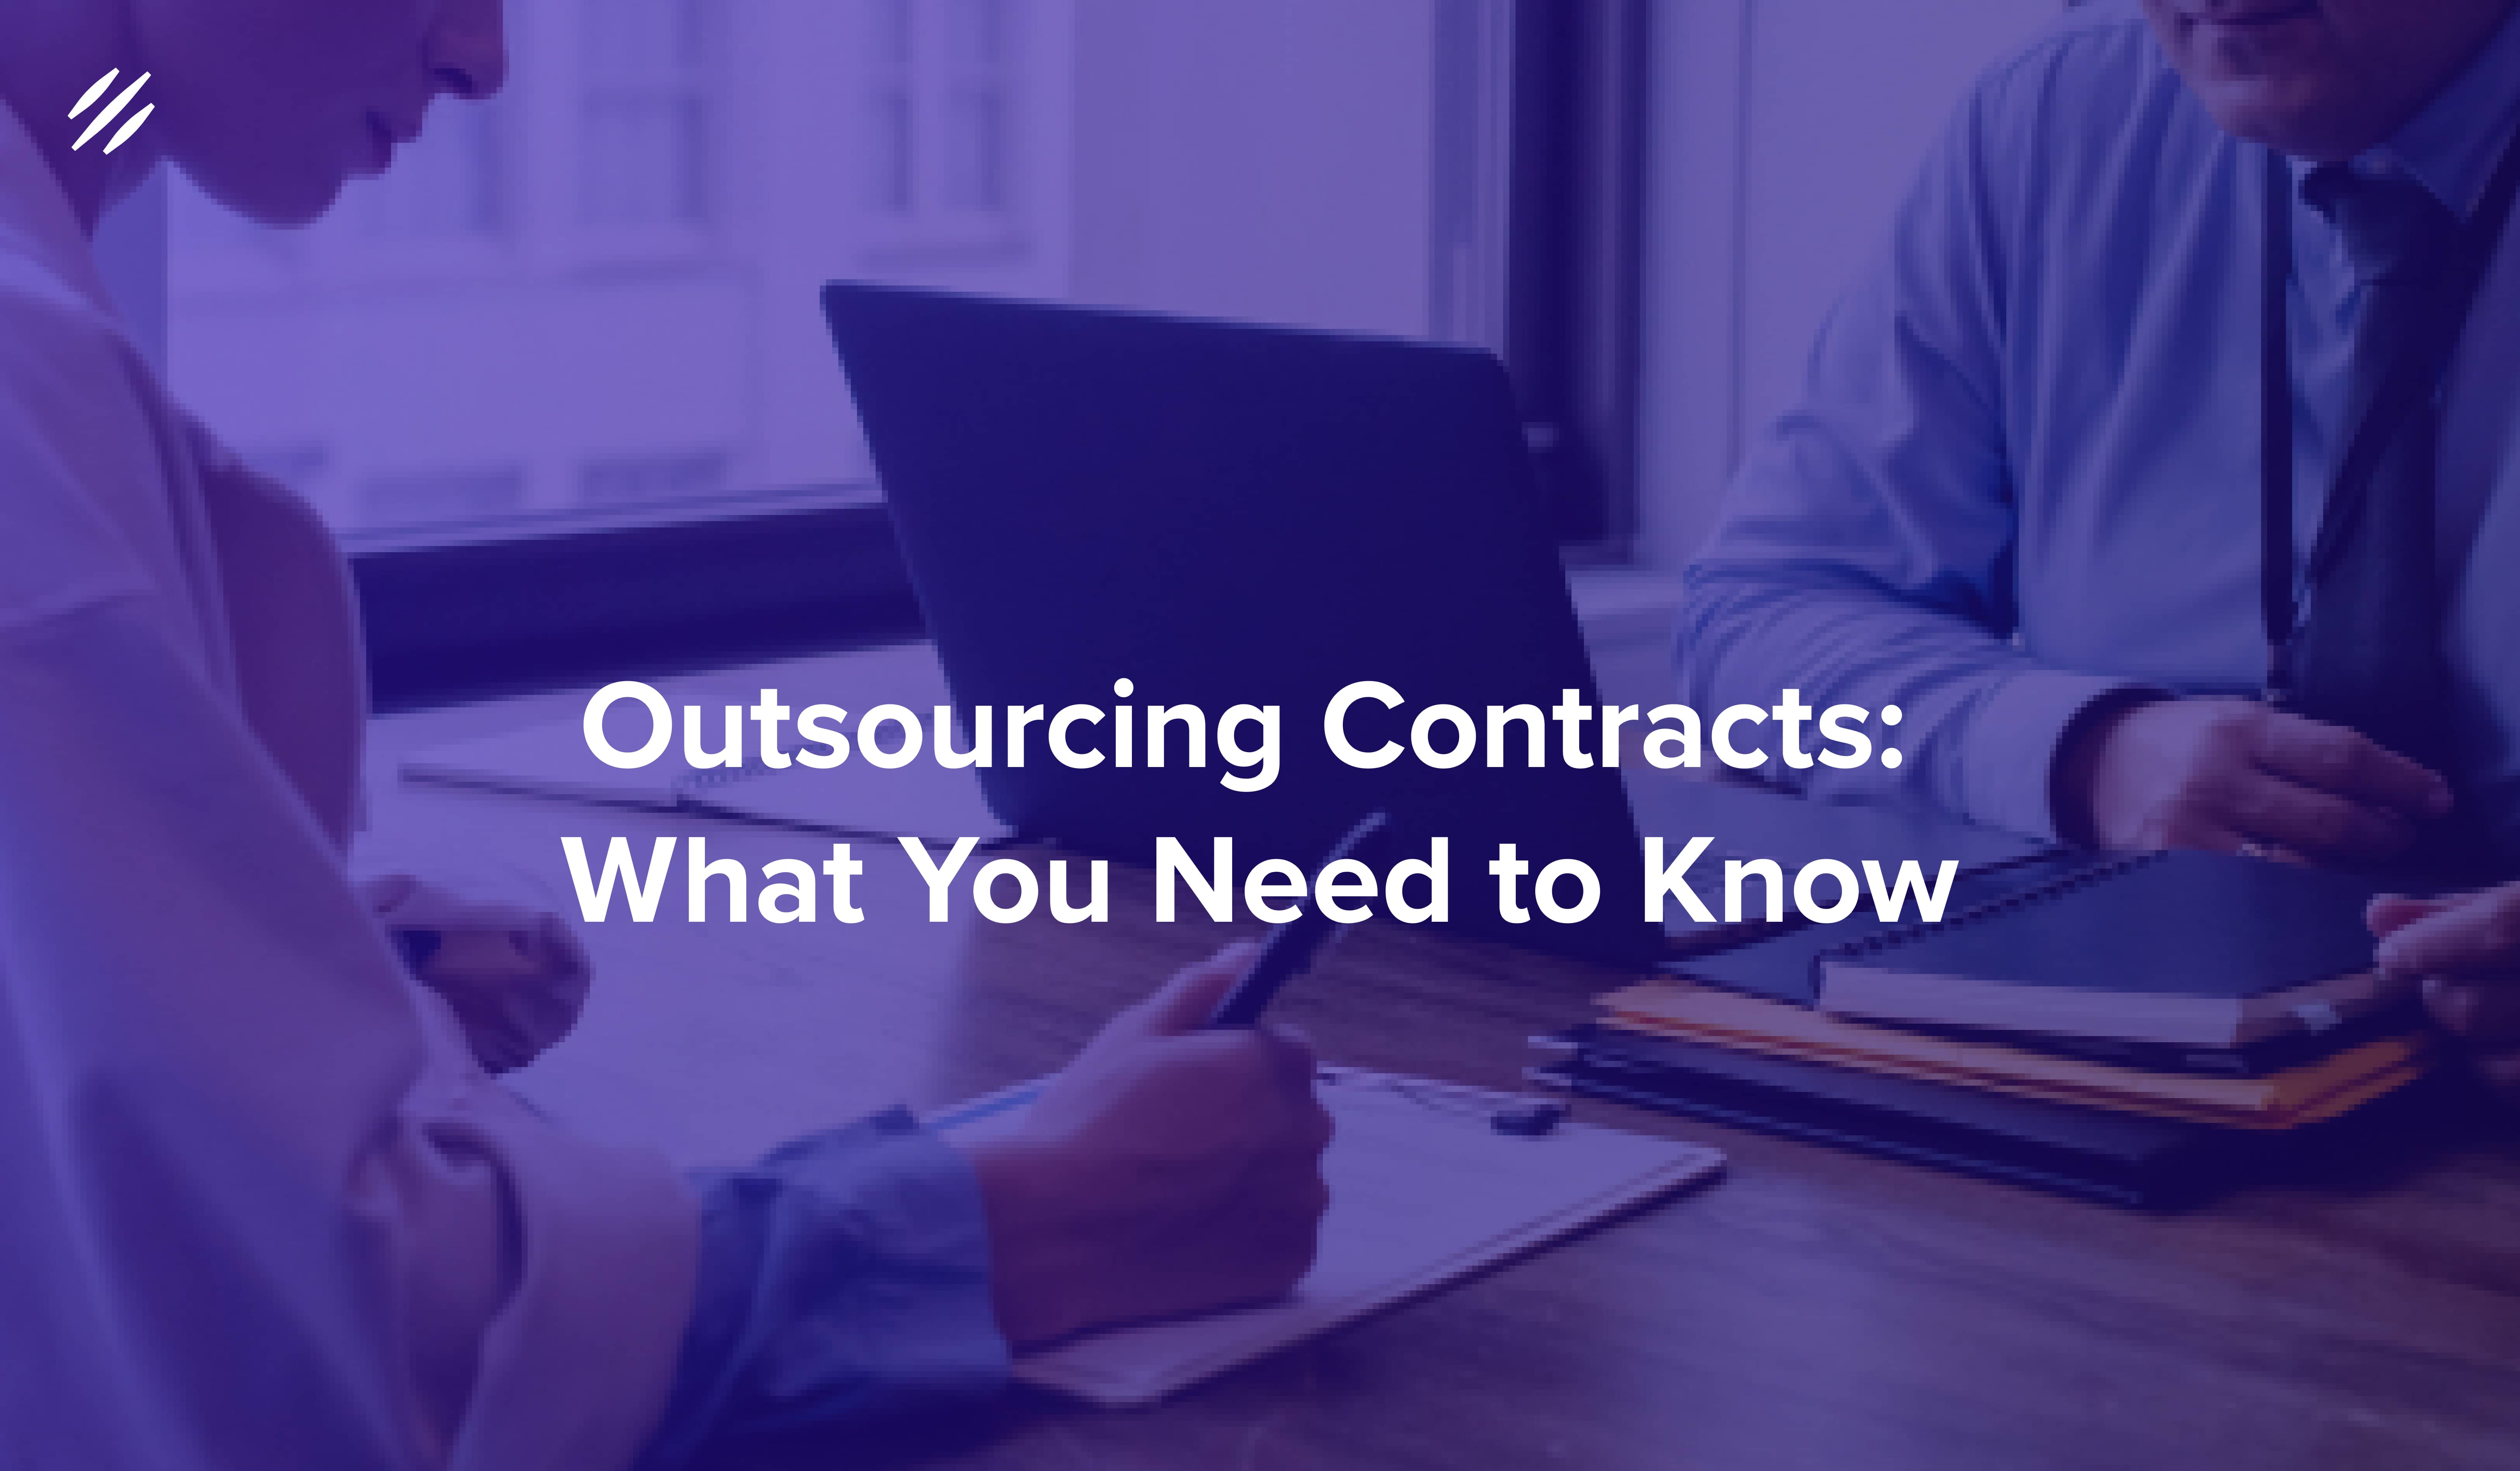 Outsourcing Contracts: What You Need to Know